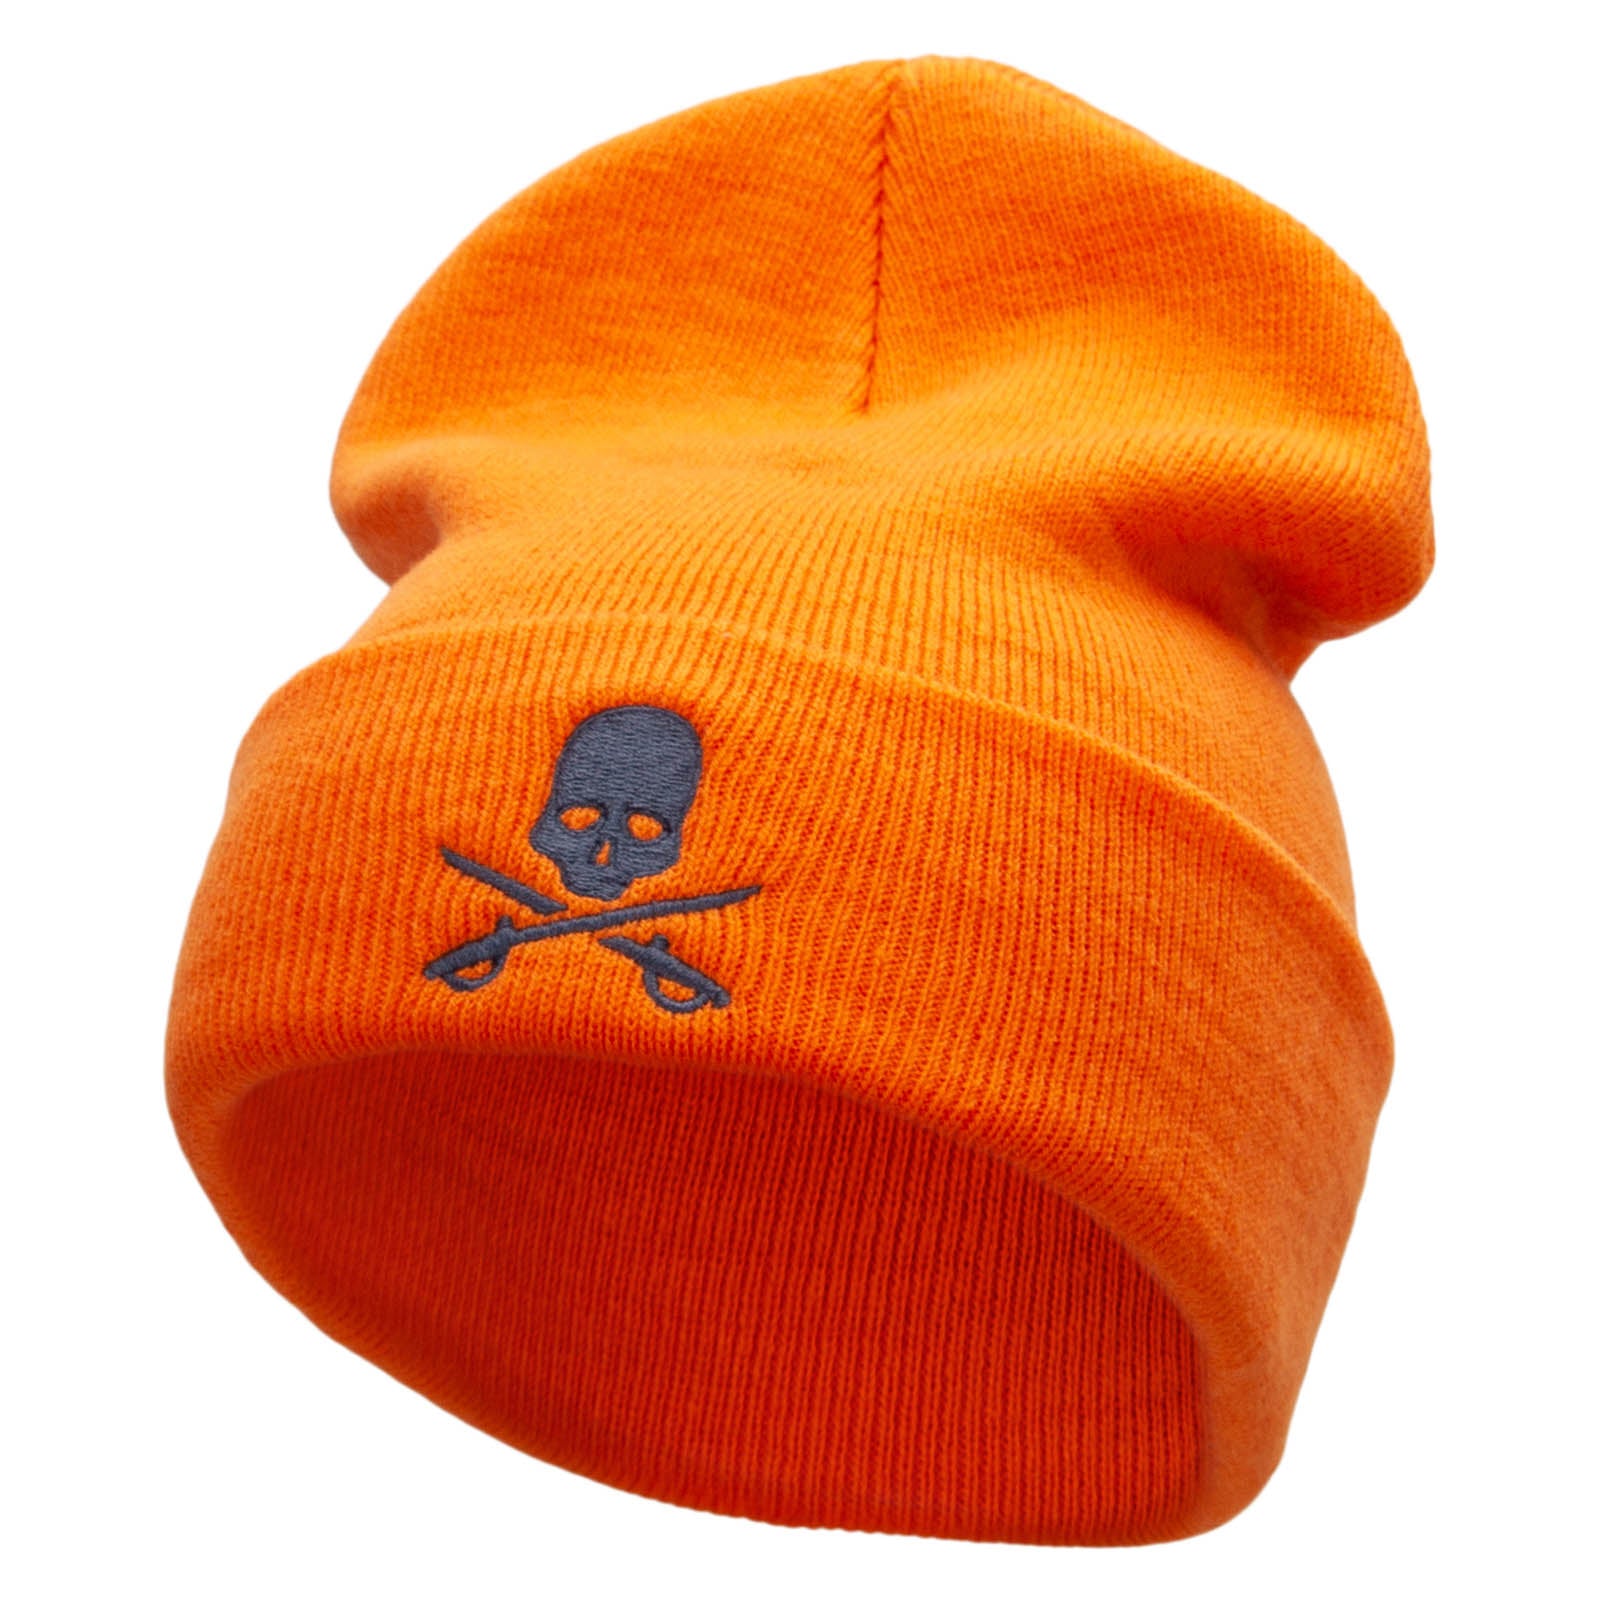 Skull And Sword Embroidered 12 Inch Long Knitted Beanie - Orange OSFM